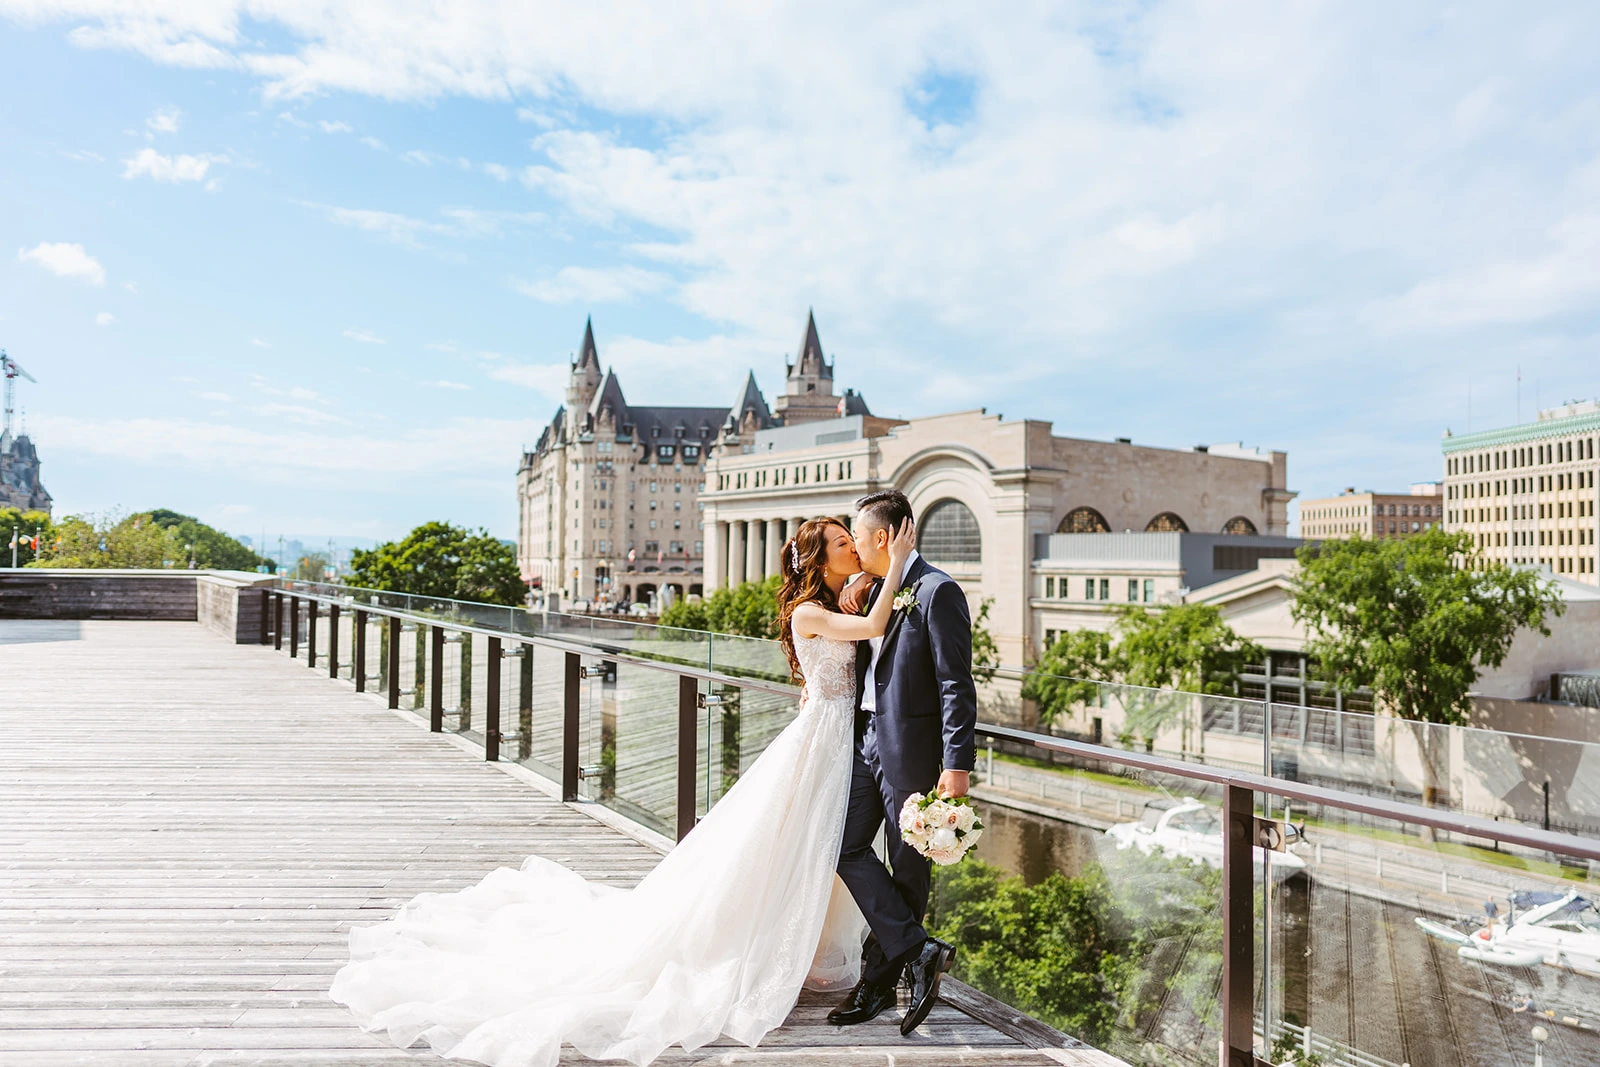 Plan your Wedding in Canada